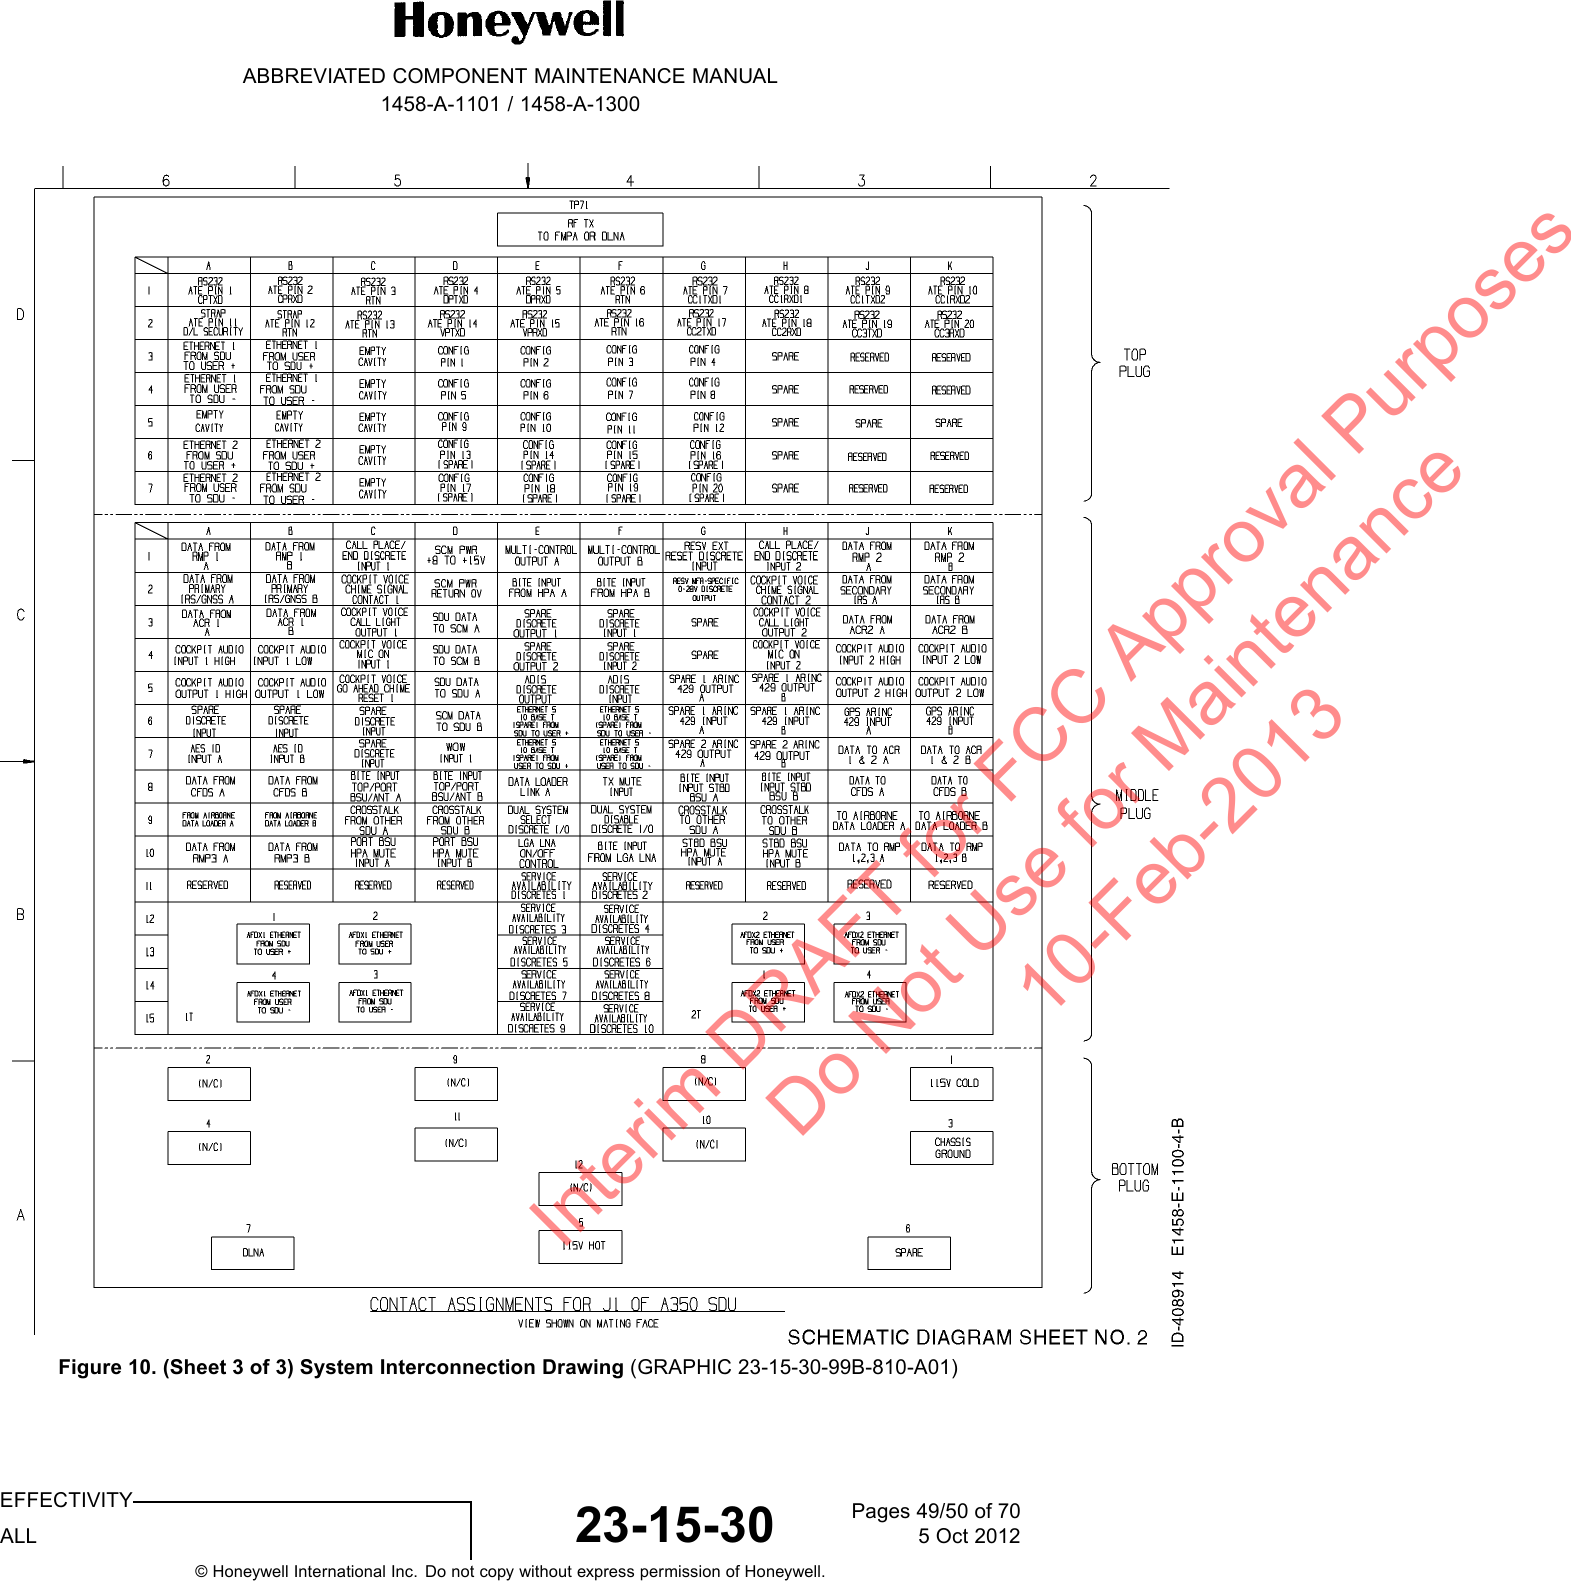 ABBREVIATED COMPONENT MAINTENANCE MANUAL1458-A-1101 / 1458-A-1300Figure 10. (Sheet 3 of 3) System Interconnection Drawing (GRAPHIC 23-15-30-99B-810-A01)EFFECTIVITYALL 23-15-30 Pages 49/50 of 705 Oct 2012© Honeywell International Inc. Do not copy without express permission of Honeywell.Interim DRAFT for FCC Approval Purposes Do Not Use for Maintenance 10-Feb-2013